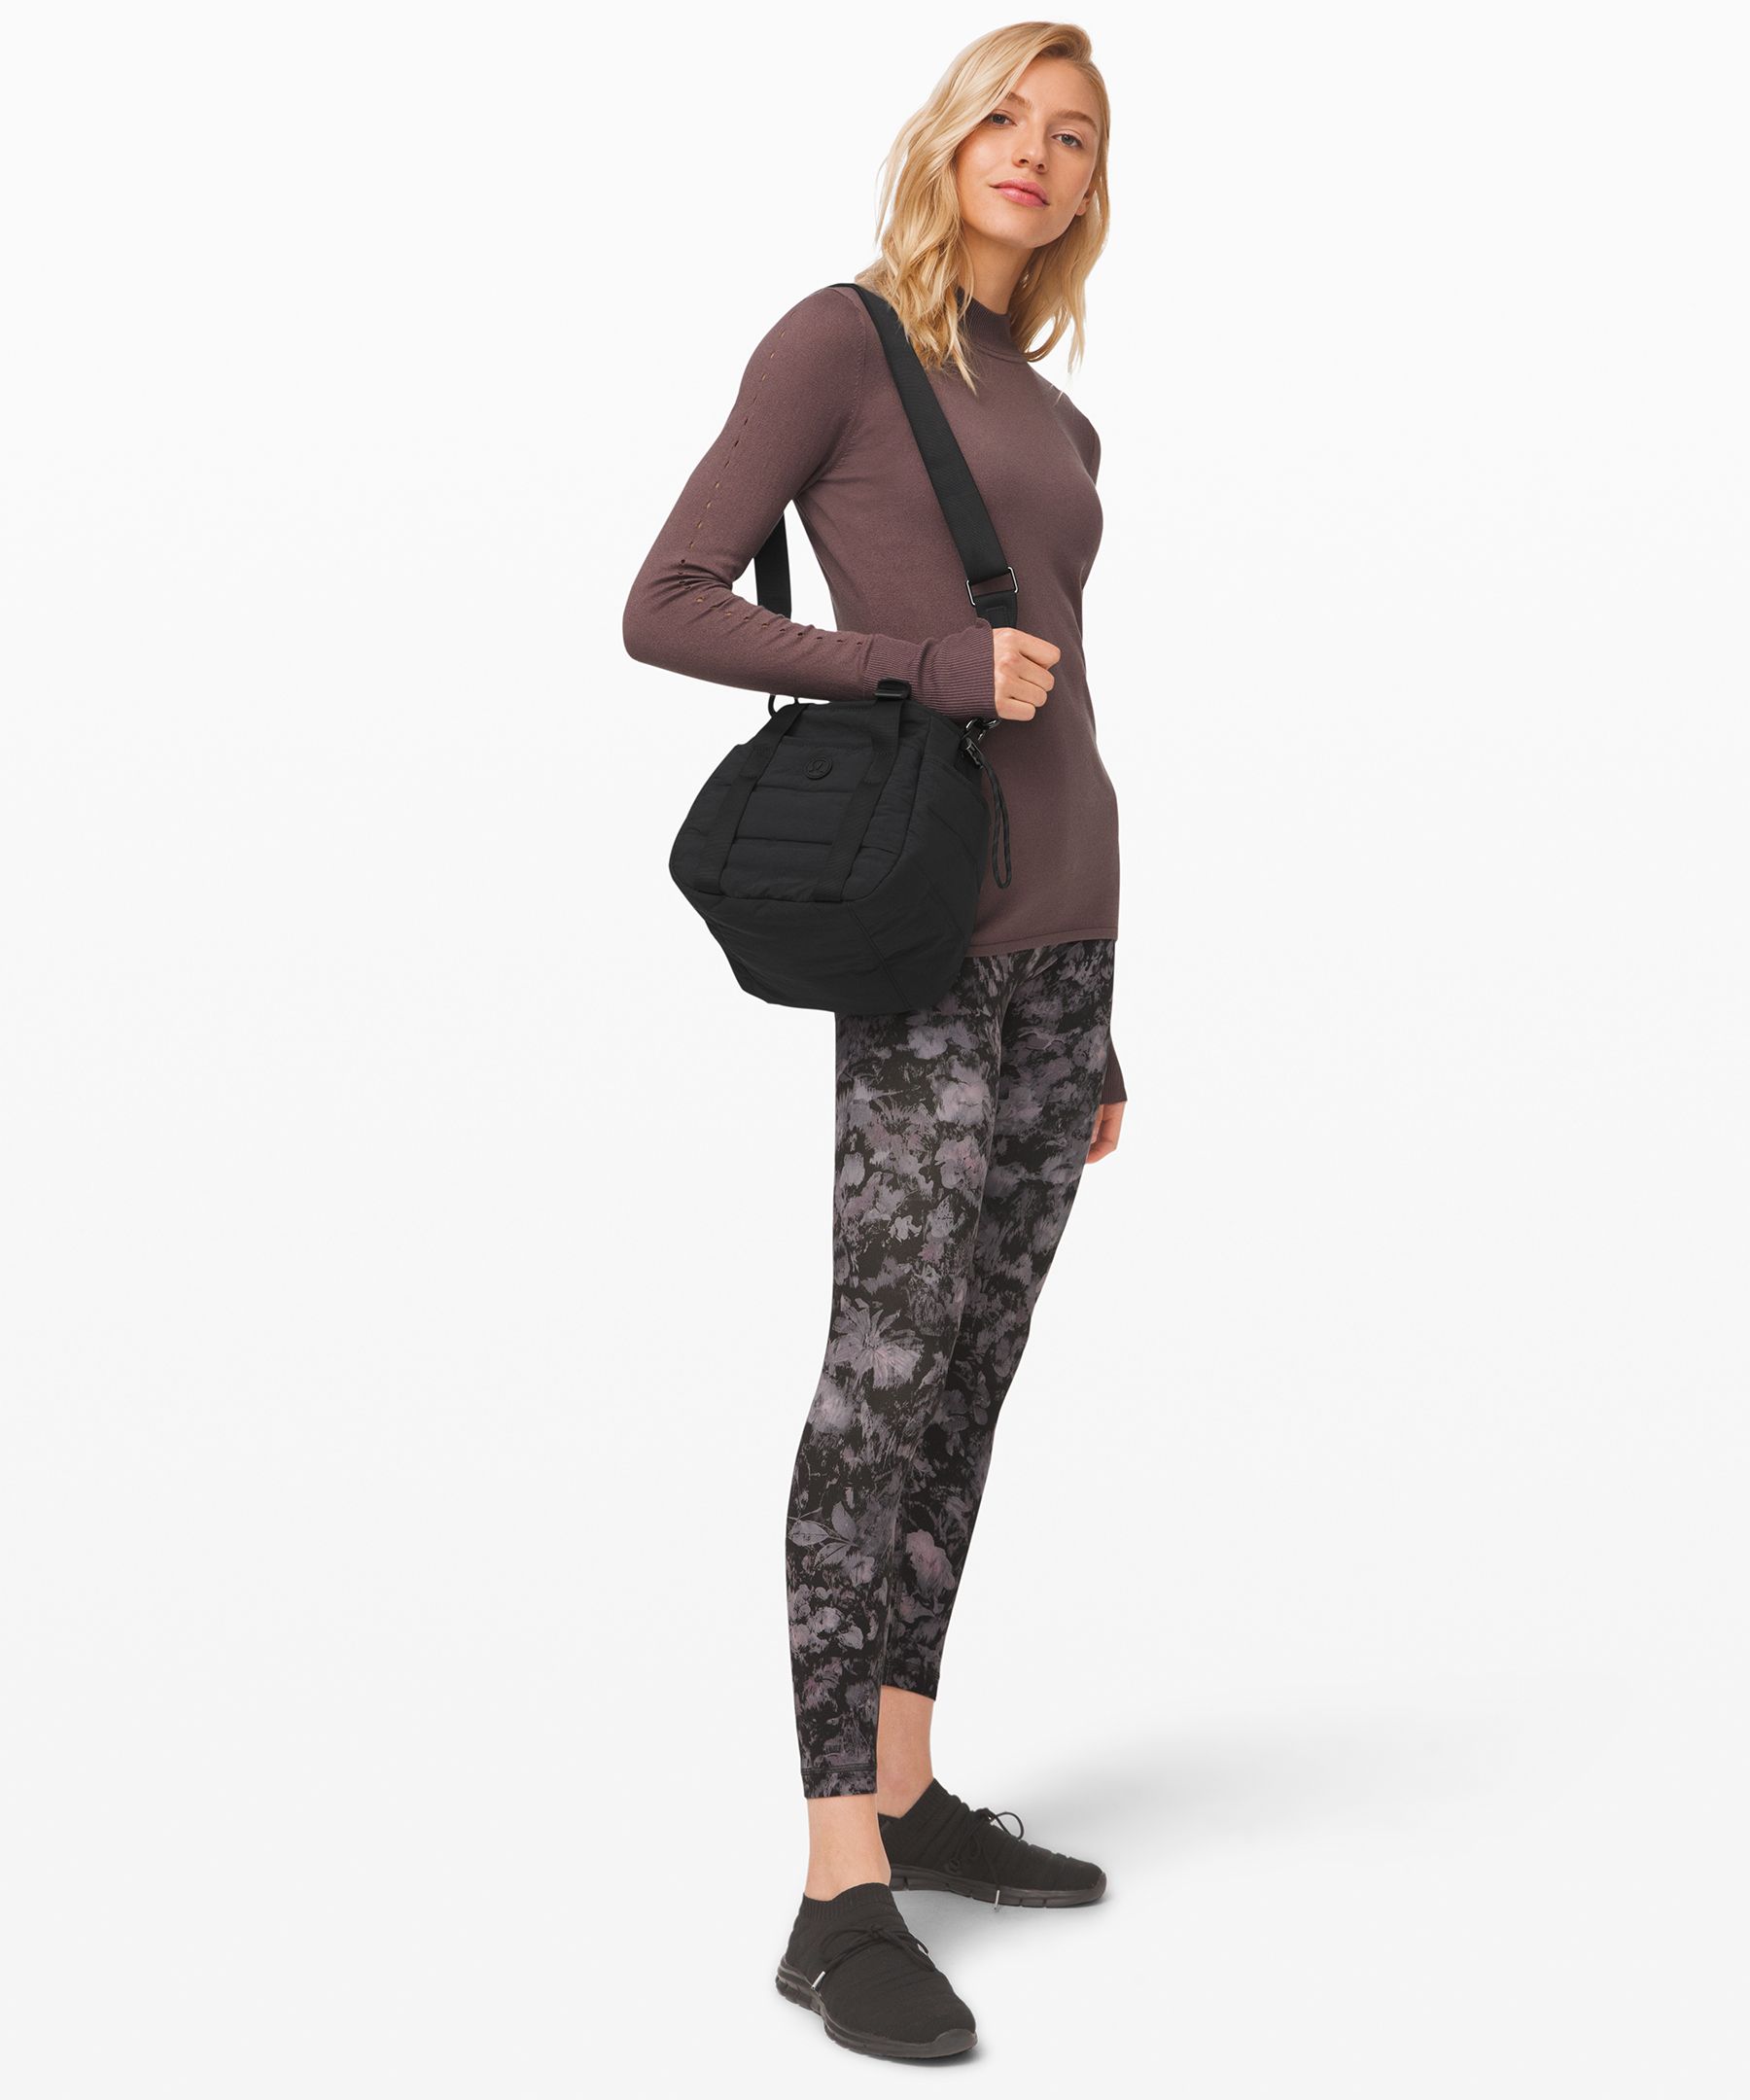 lululemon all day tote